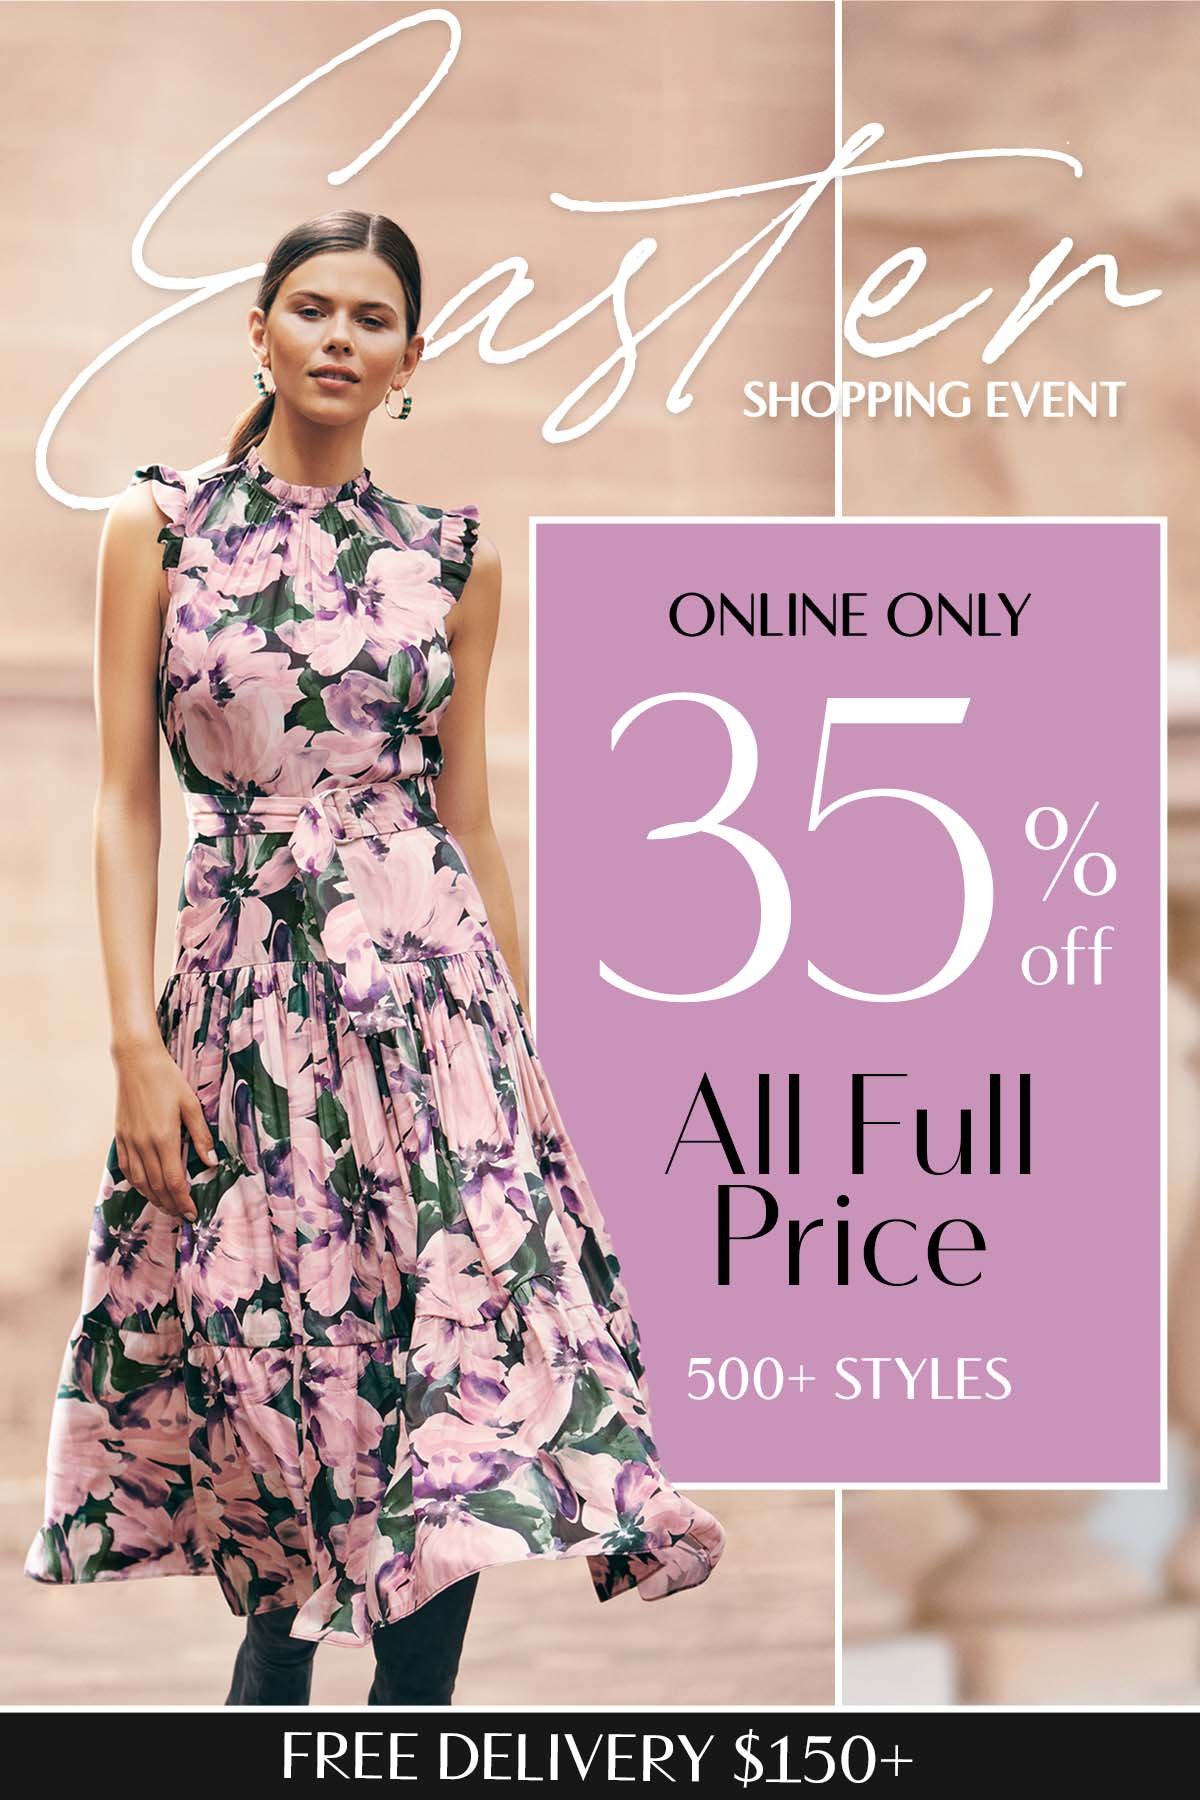 Easter Shopping Event. 35% Off All Full Price & New Arrivals. 500+ Styles. Online Only. Free Delivery $150+